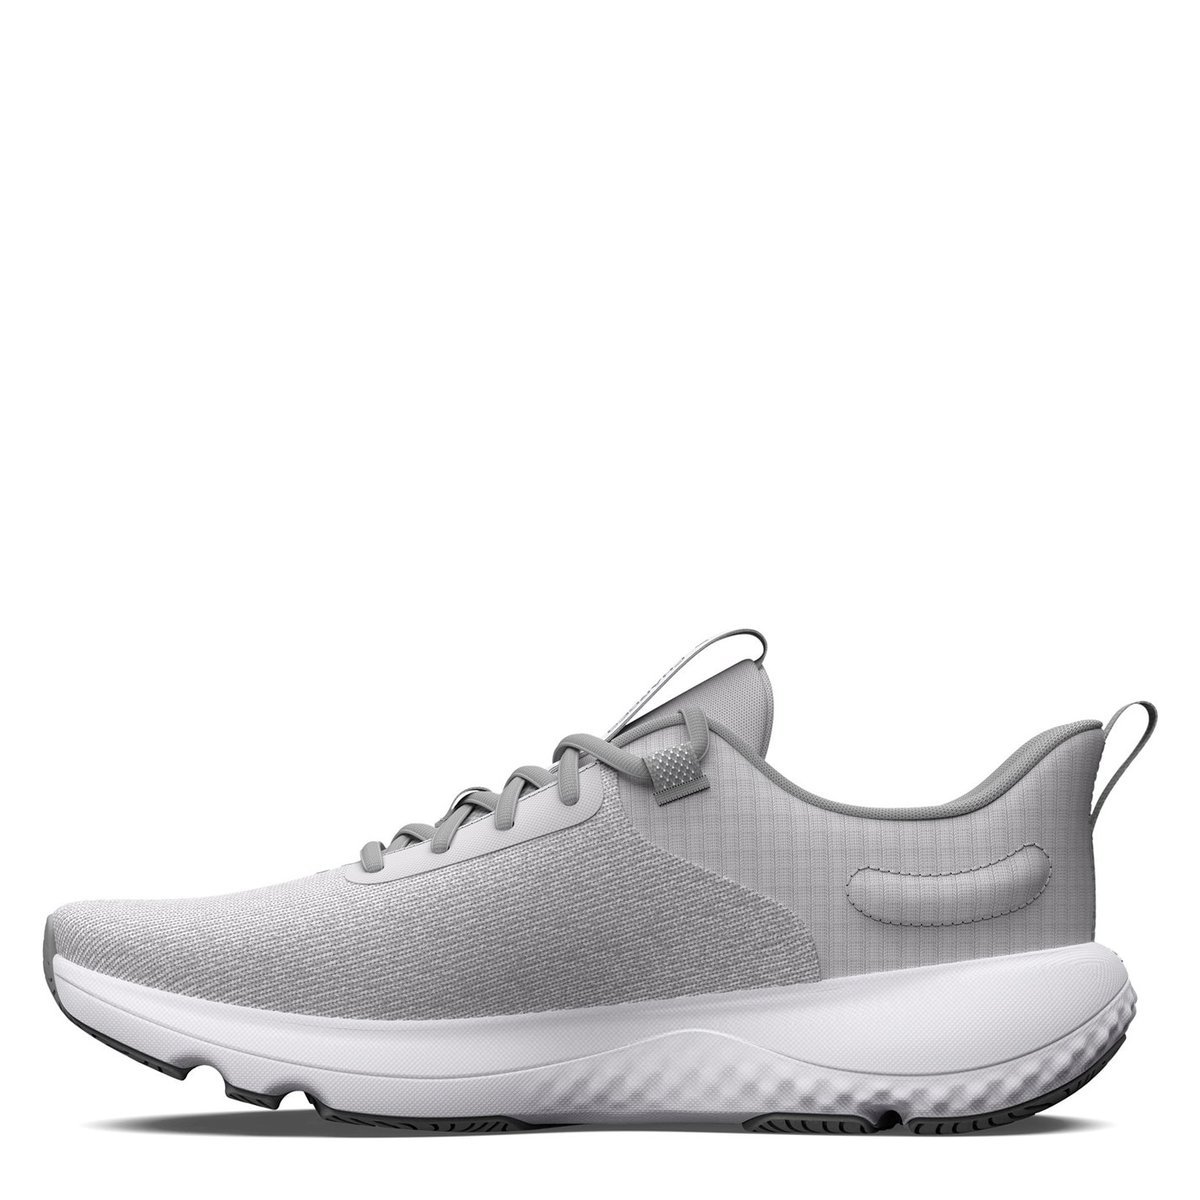 Under Armour Charged Revitalize Running Shoes Womens Halo Grey, £40.00